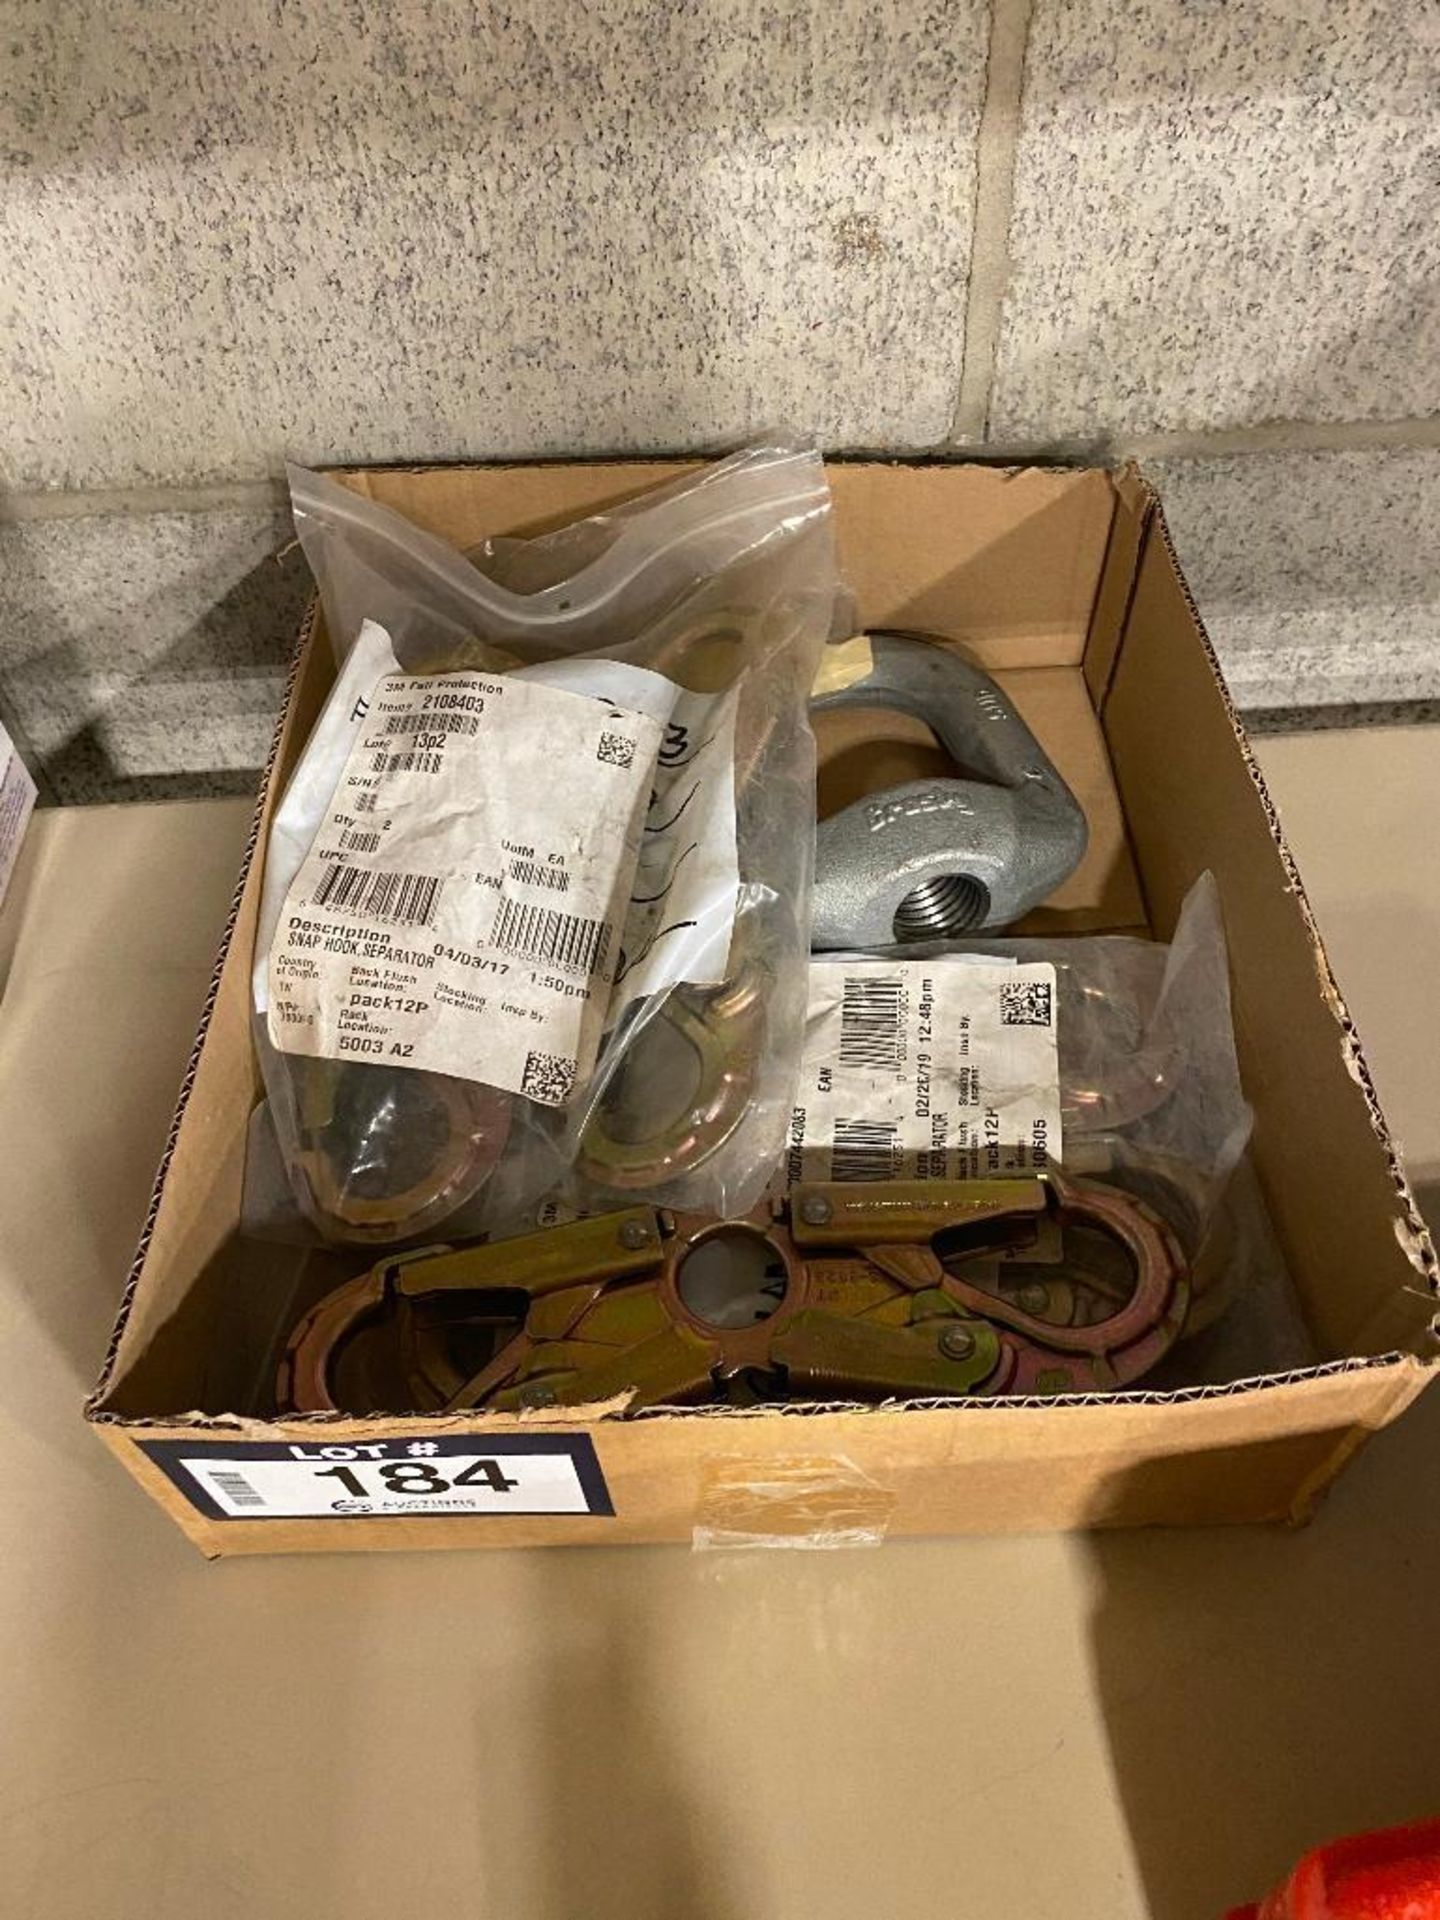 Box of Asst. Fall Protection Clips etc.